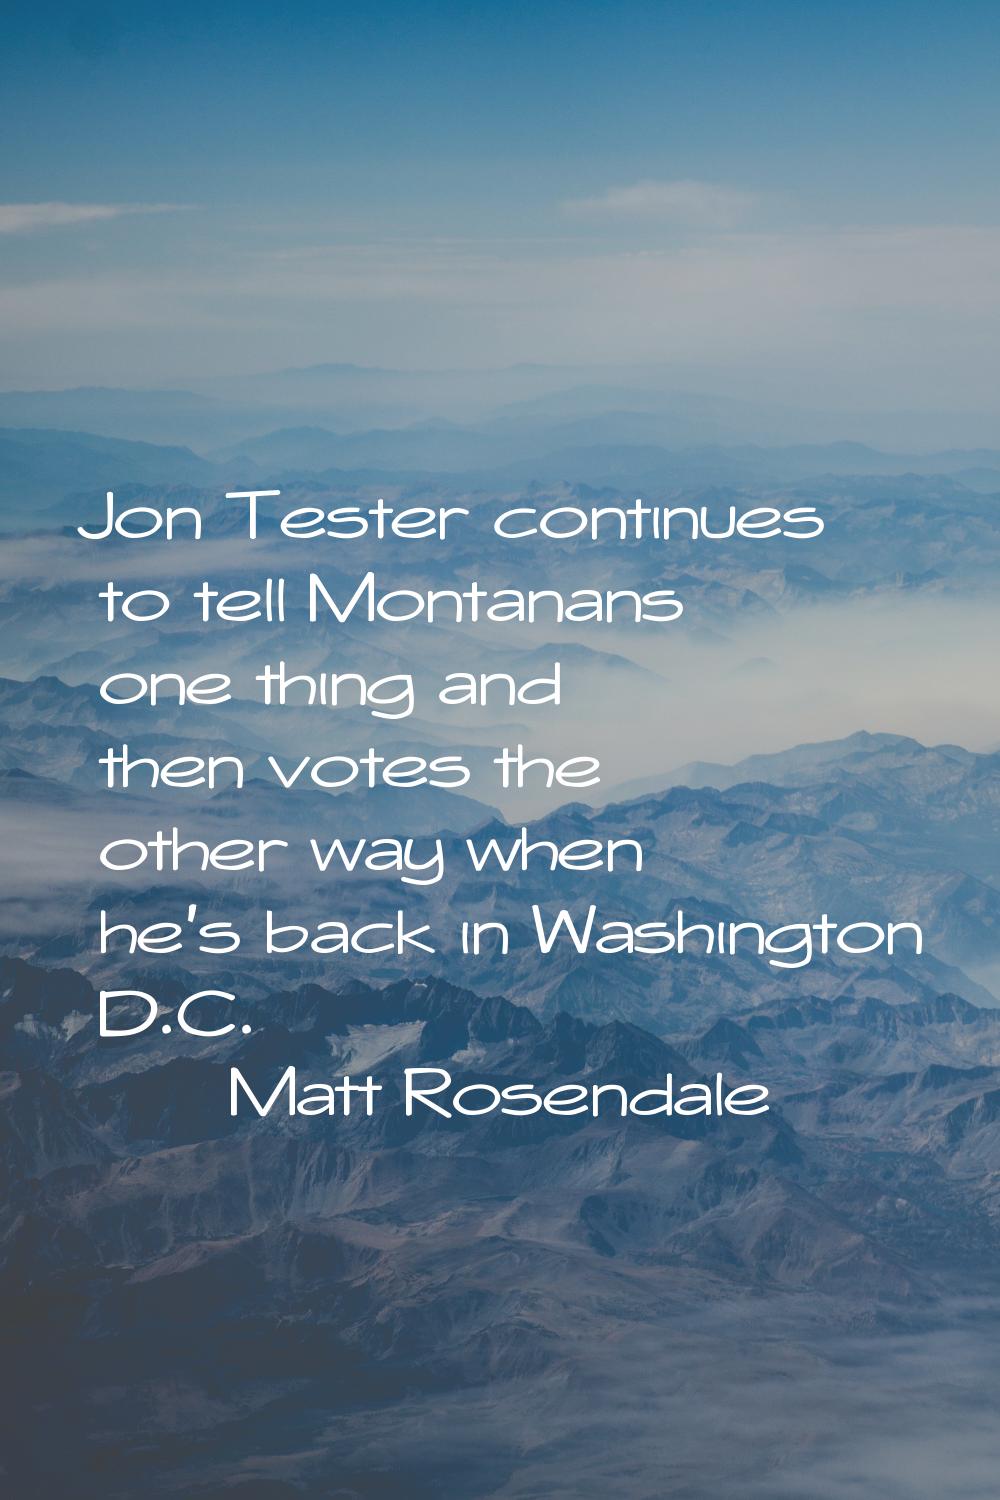 Jon Tester continues to tell Montanans one thing and then votes the other way when he's back in Was